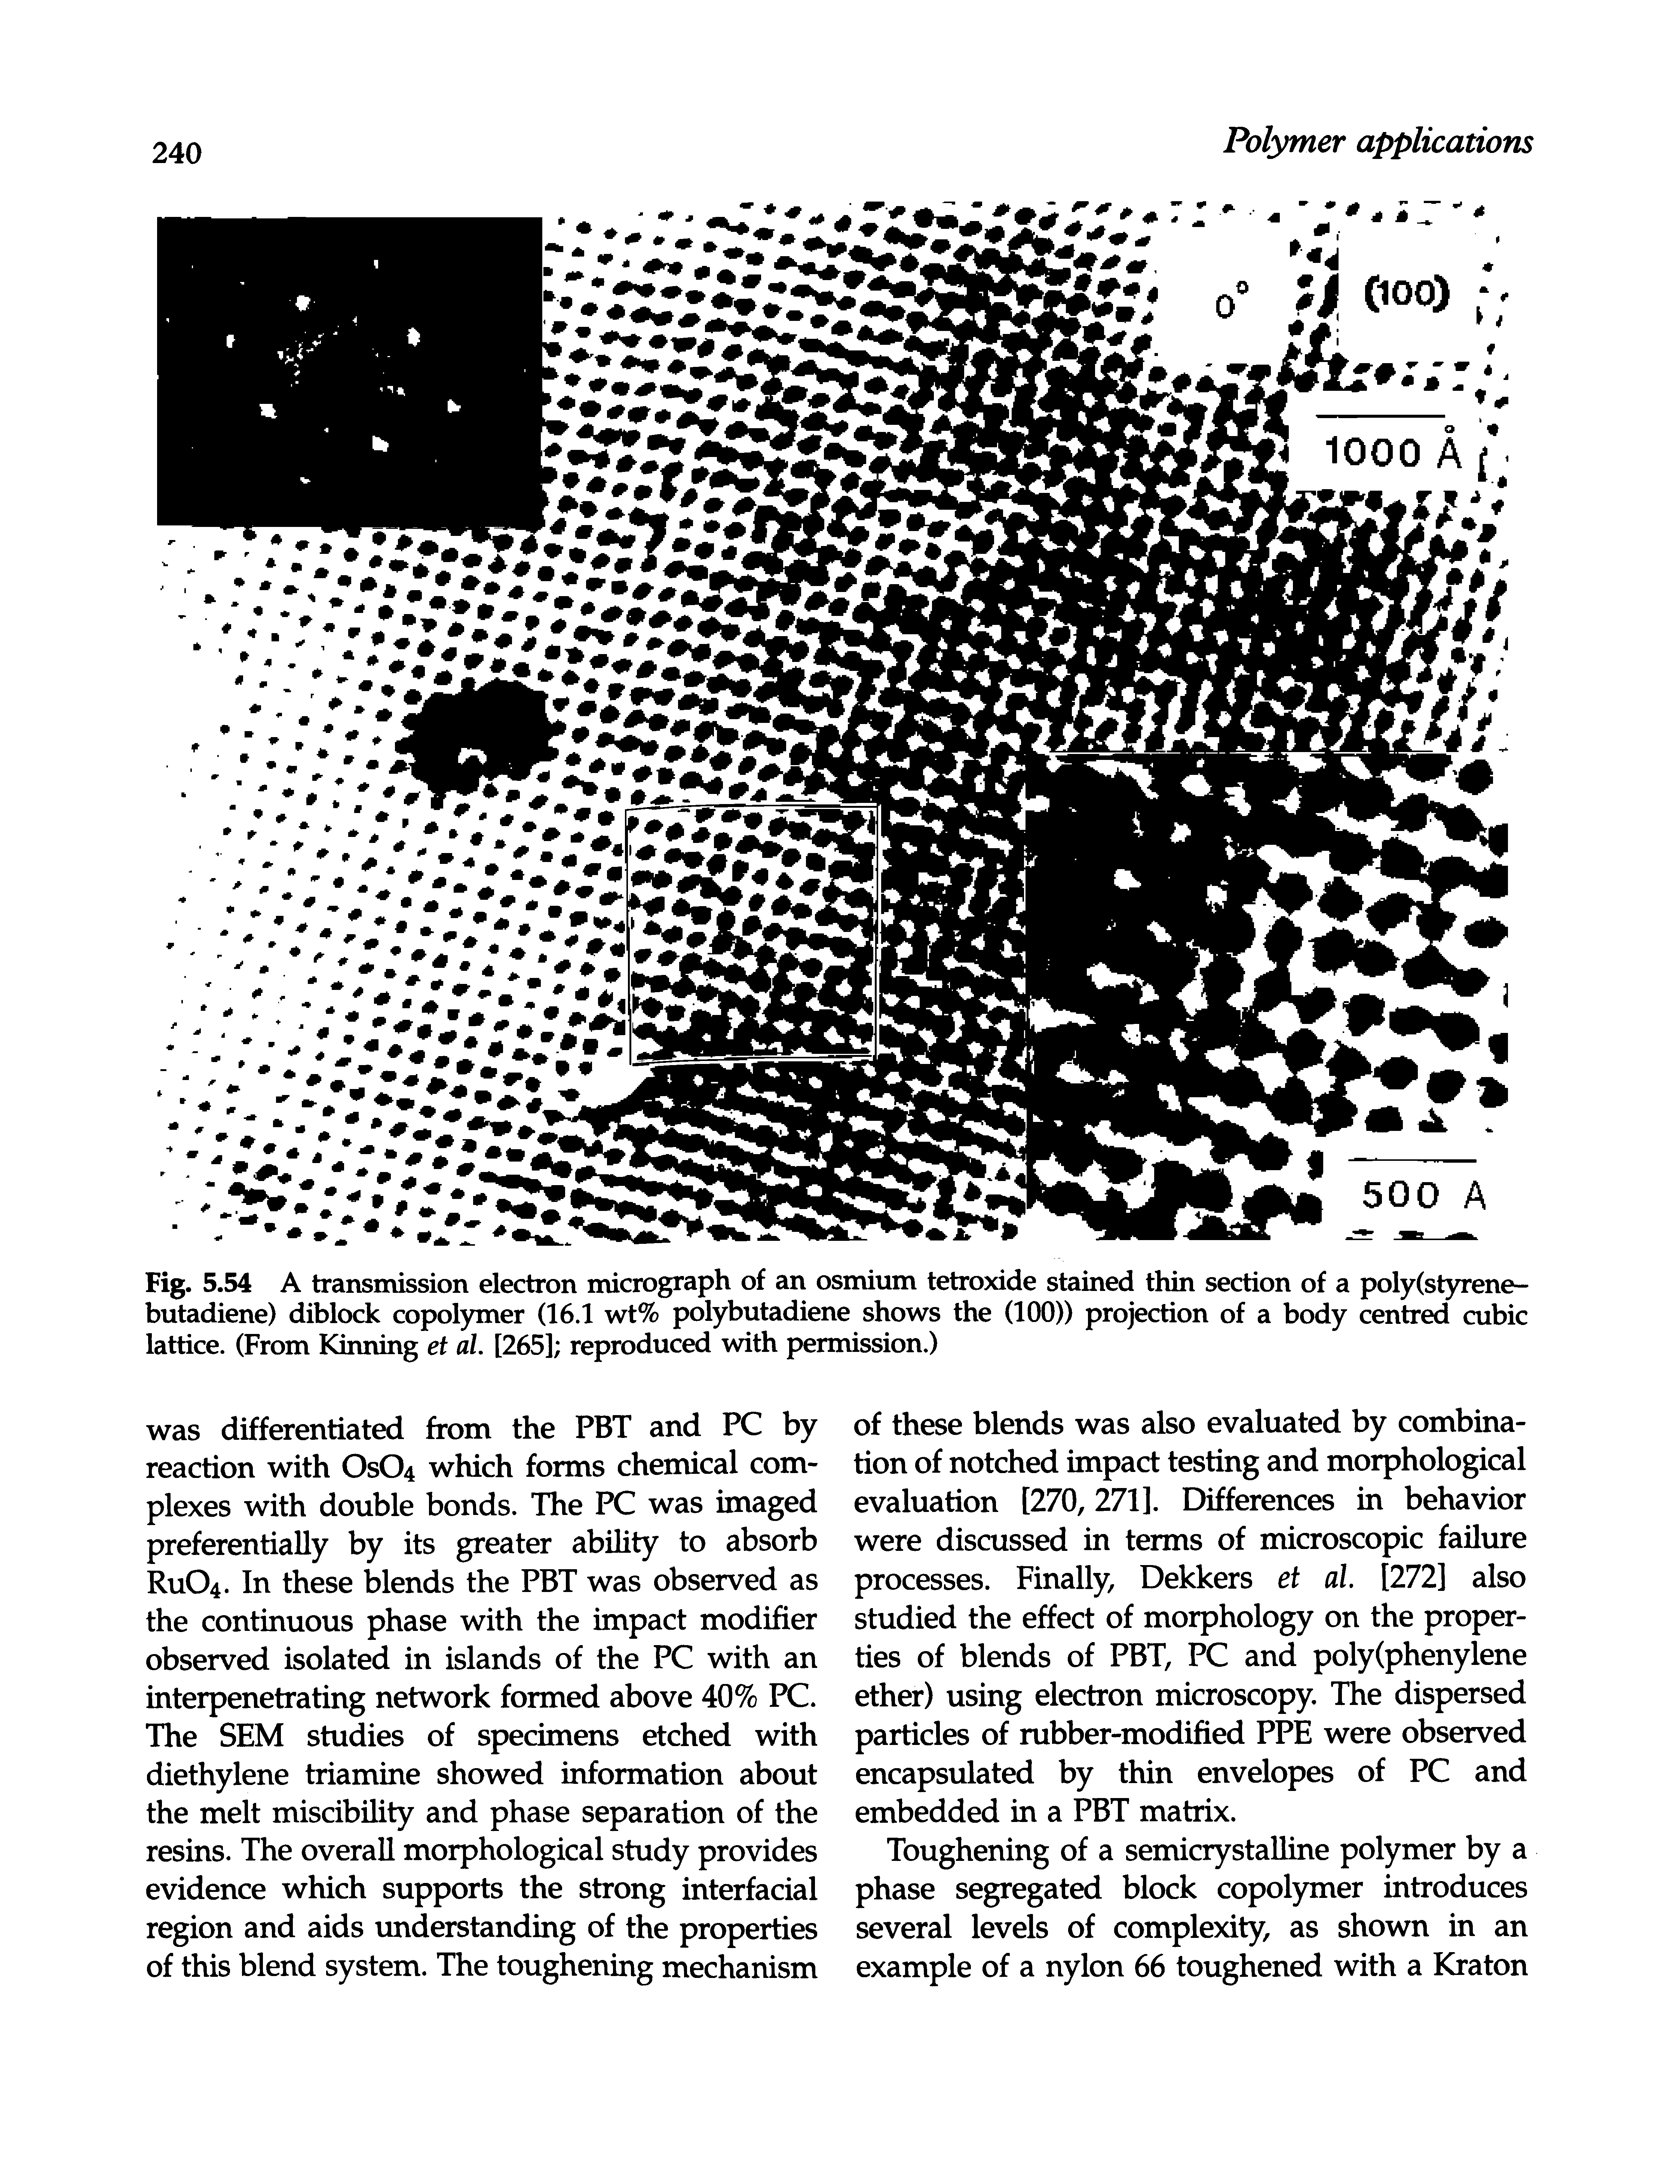 Fig. 5.54 A transmission electron micrograph of an osmium tetroxide stained thin section of a poly(st)TCne-butadiene) diblock copolymer (16.1 wt% polybutadiene shows the (100)) projection of a body centred cubic lattice. (From Kinning et al. [265] reproduced with jjermission.)...